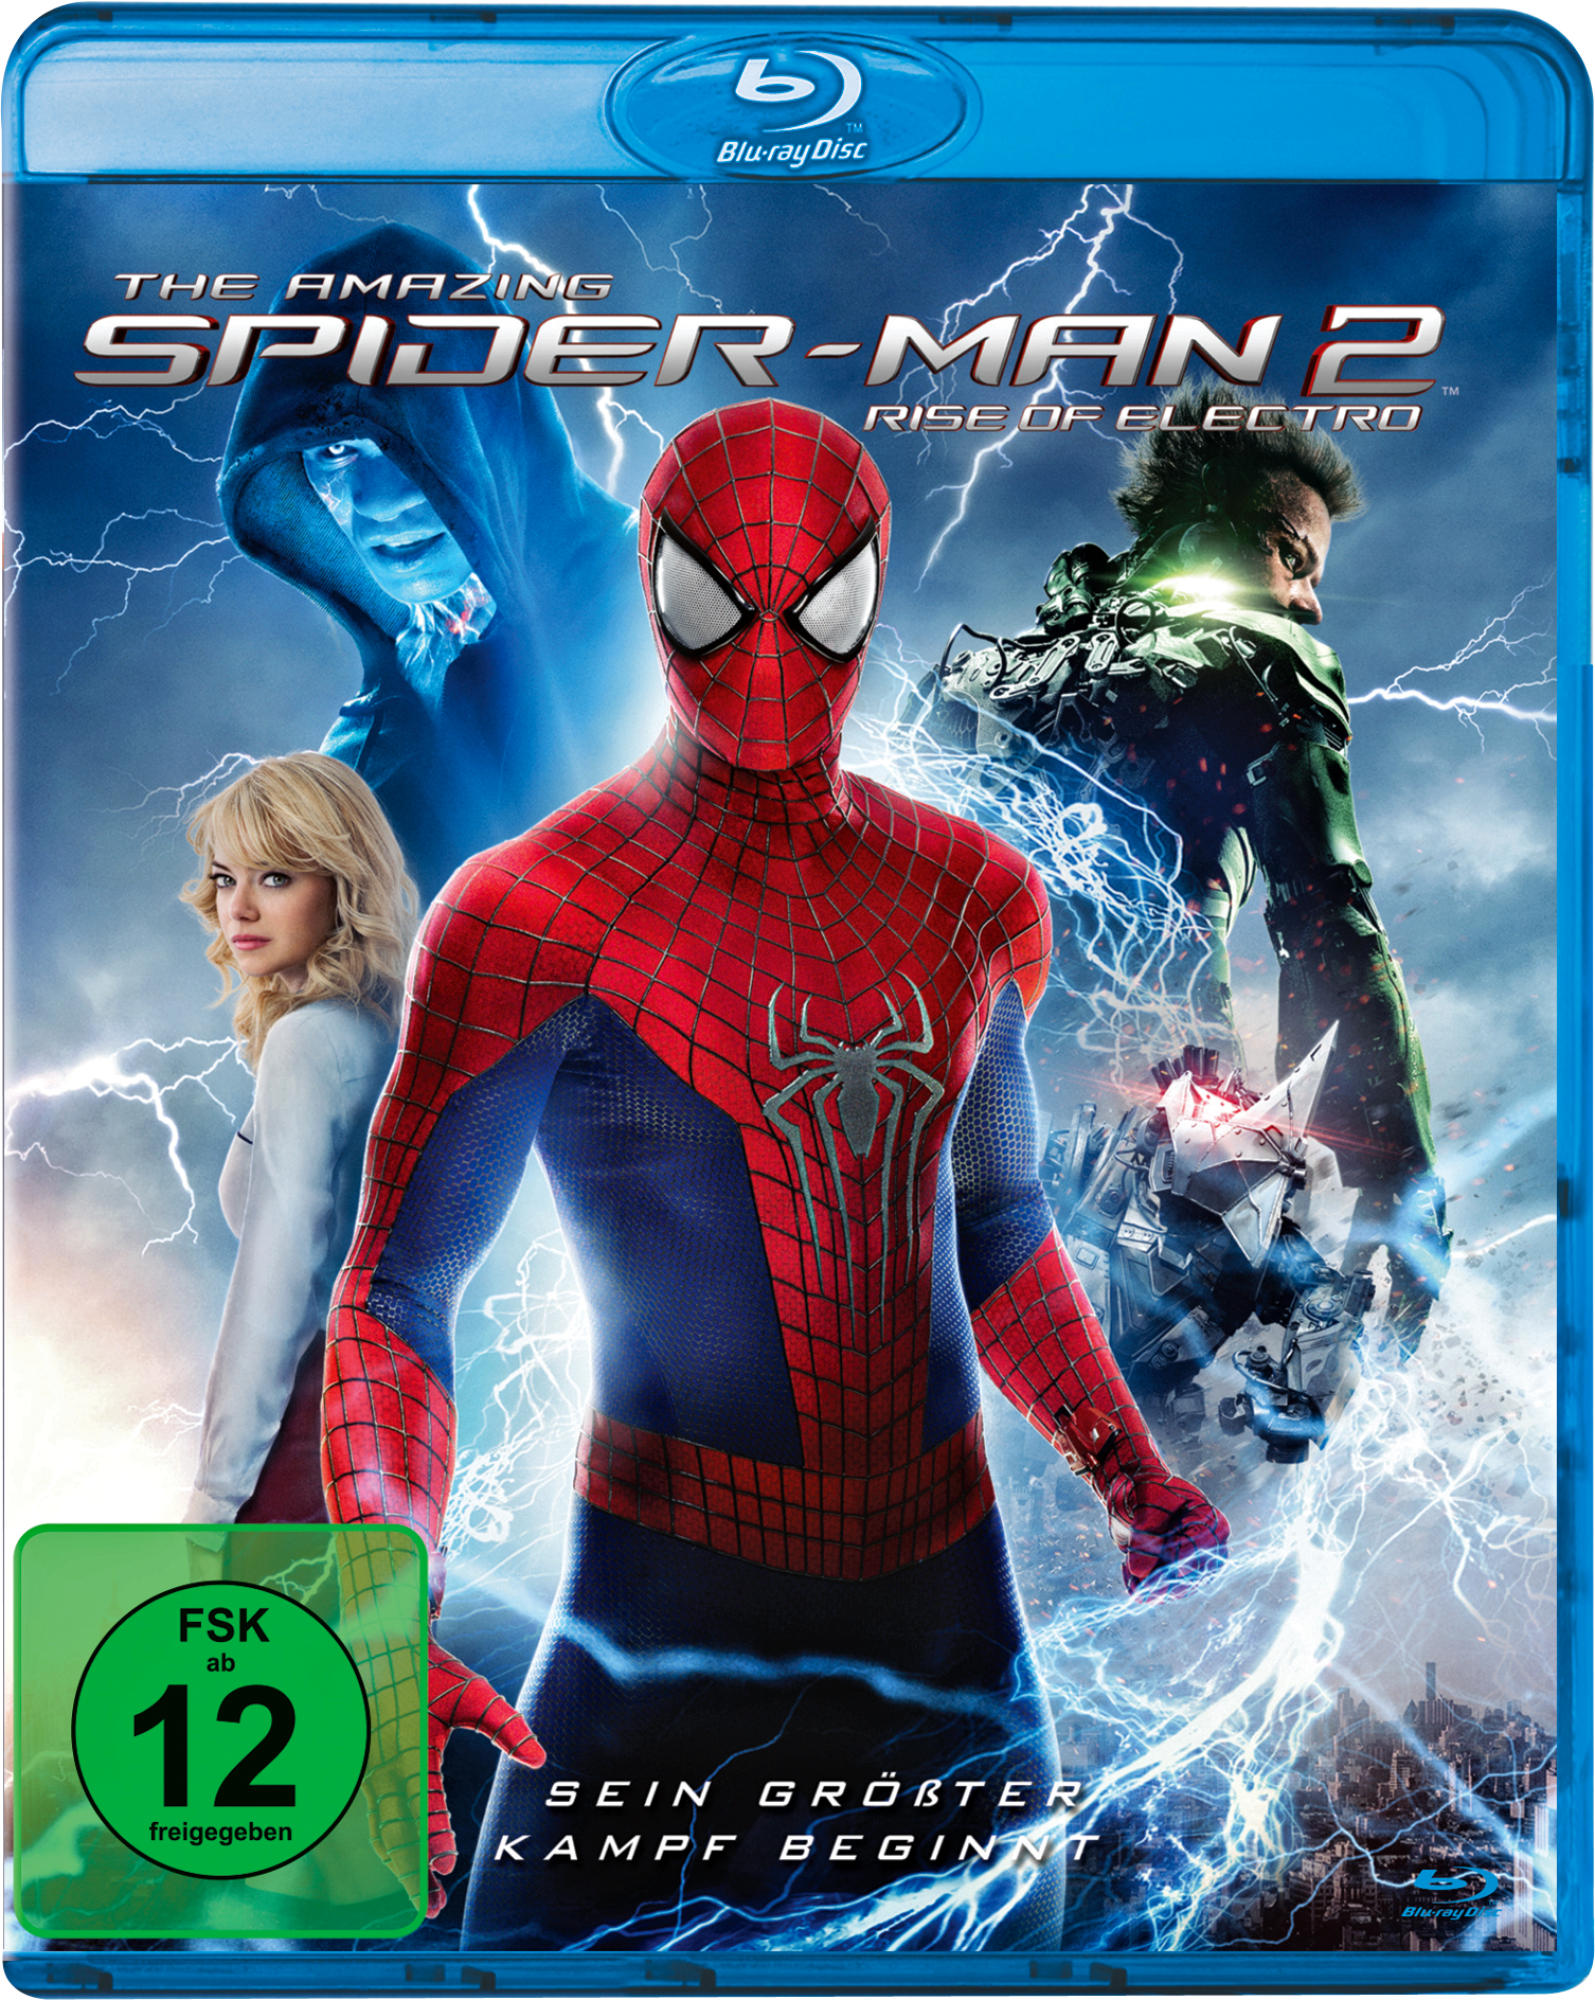 The Amazing Spider-Man 2: Rise Blu-ray of Electro